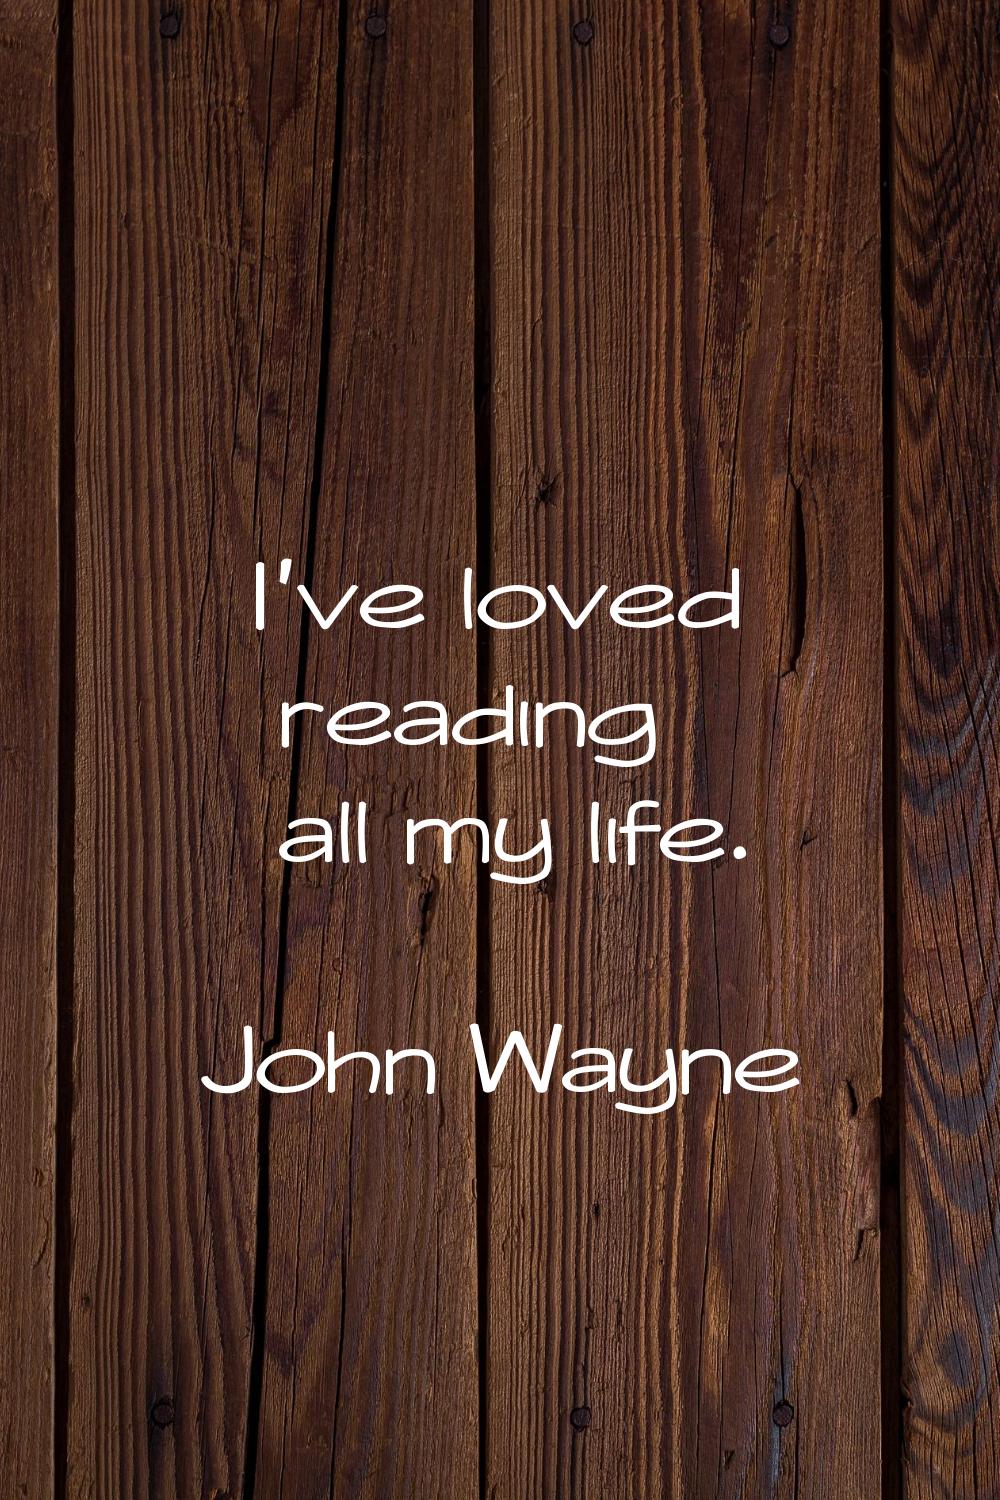 I've loved reading all my life.